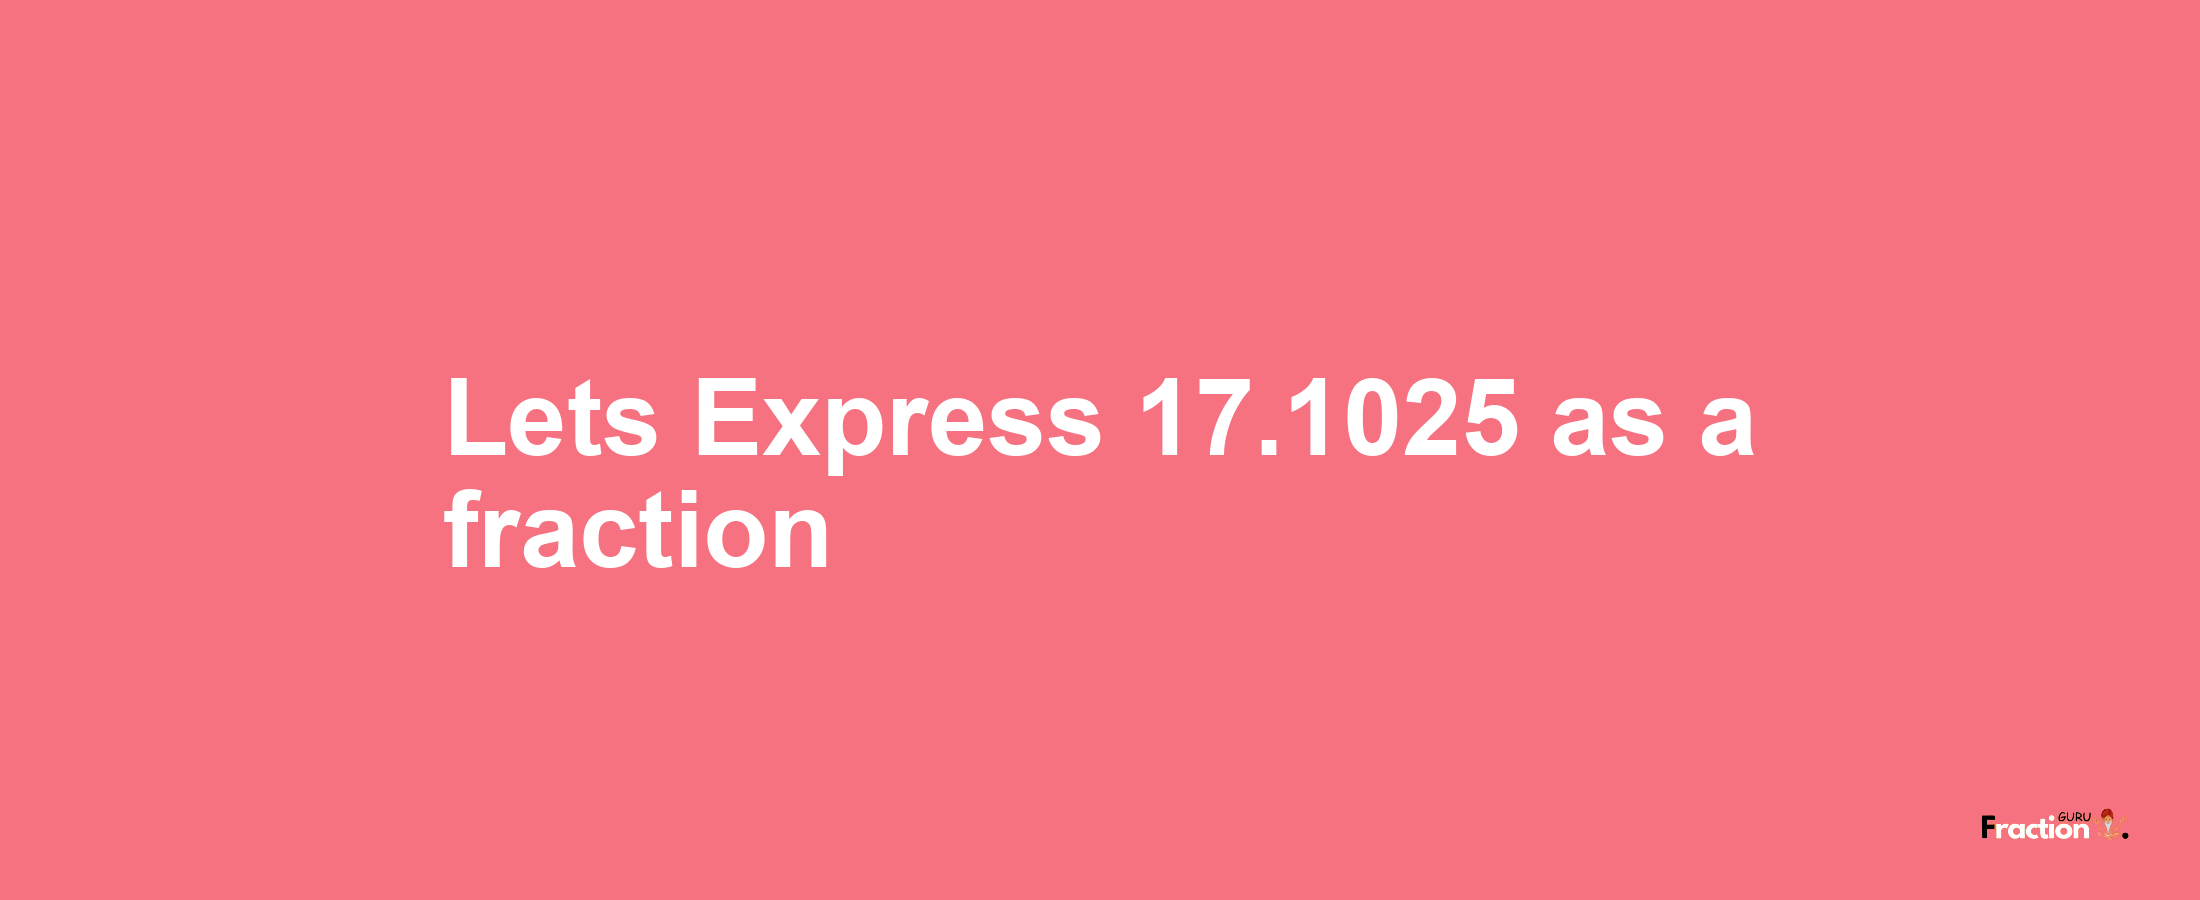 Lets Express 17.1025 as afraction